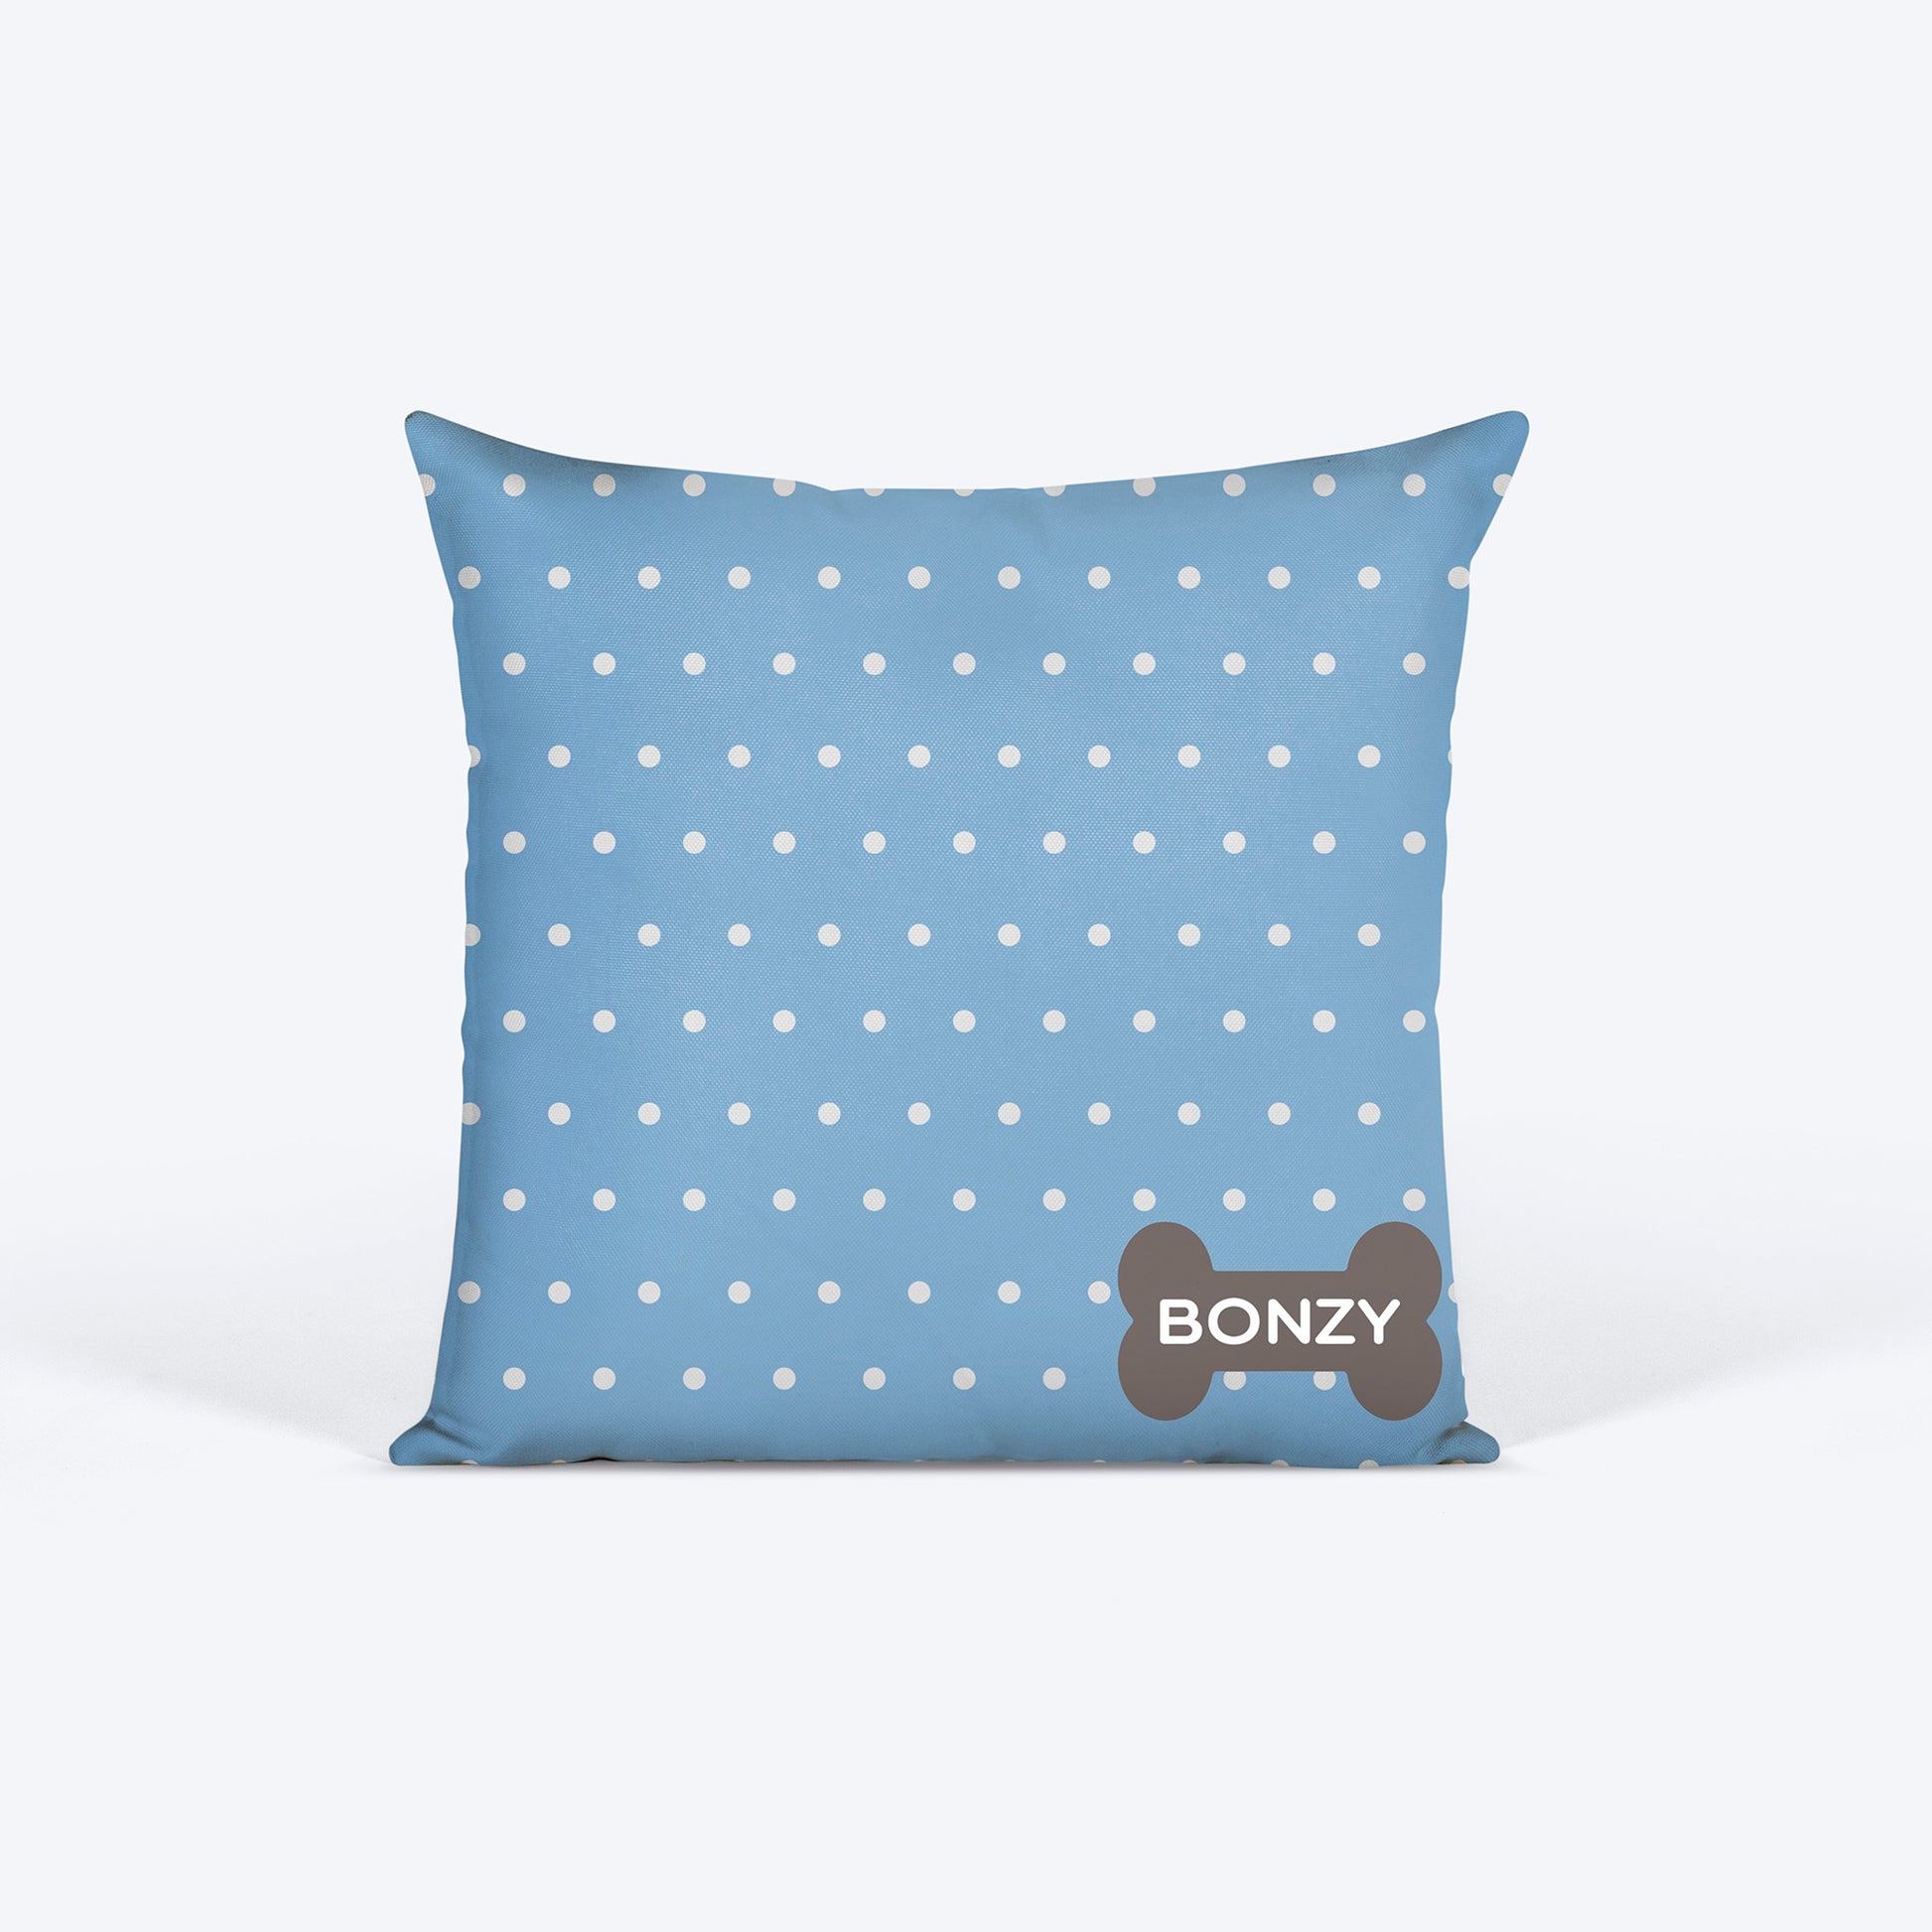 HUFT Blue Polka Dot Personalised Cushion - 12 inches (30 x 30 cm) - Heads Up For Tails